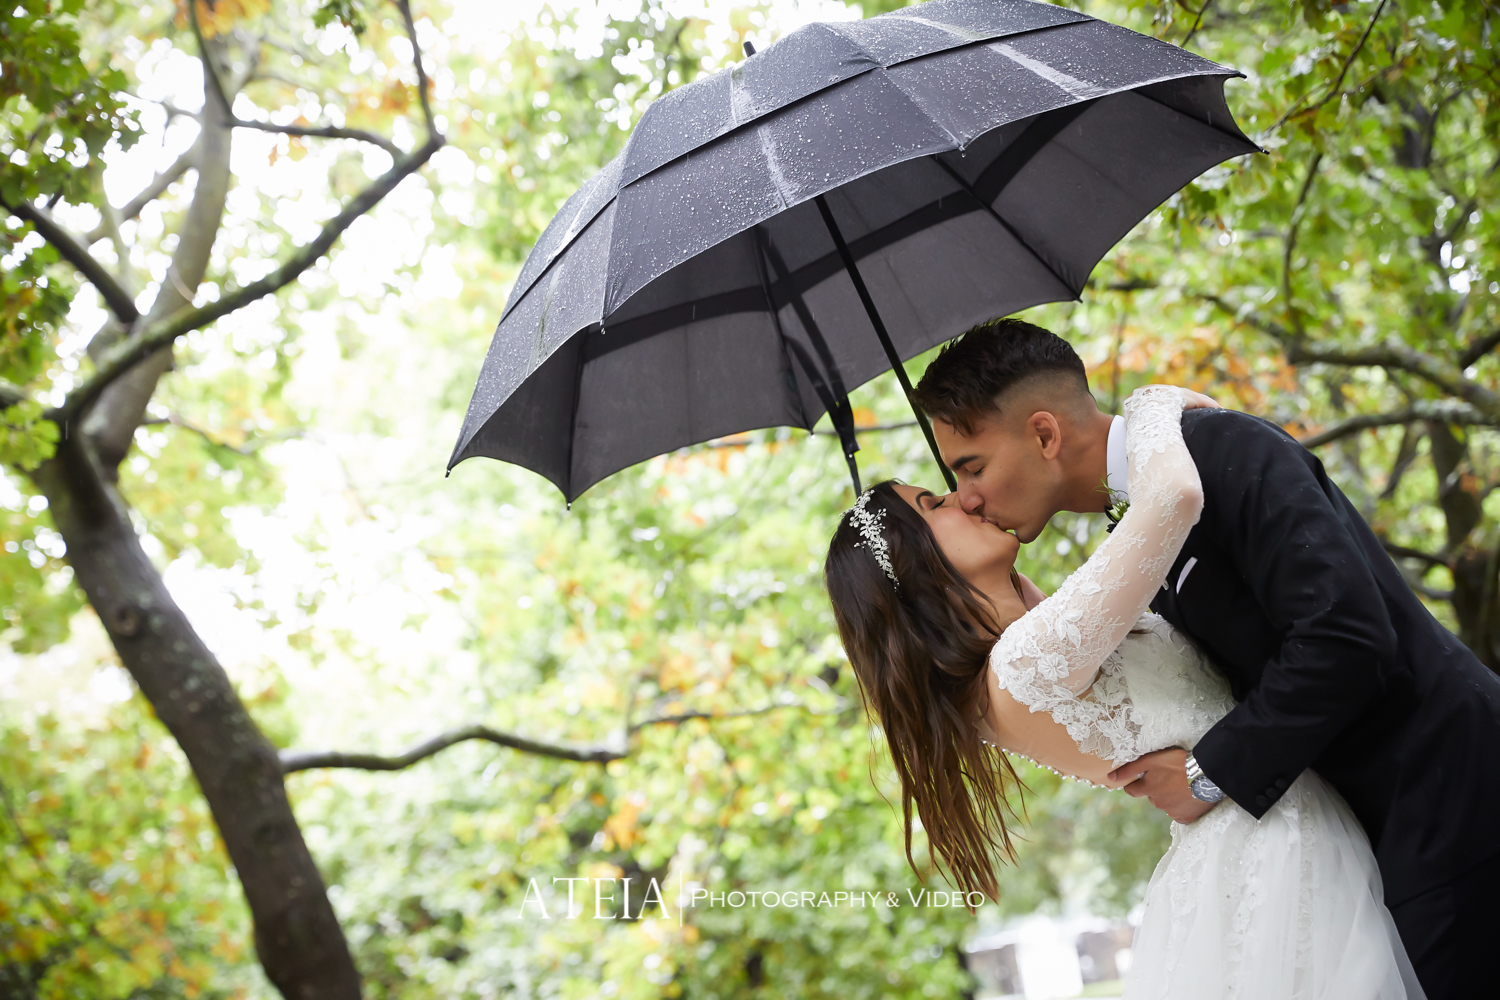 , Stavroula and David&#8217;s Wedding Photography Melbourne by ATEIA Photography &#038; Video